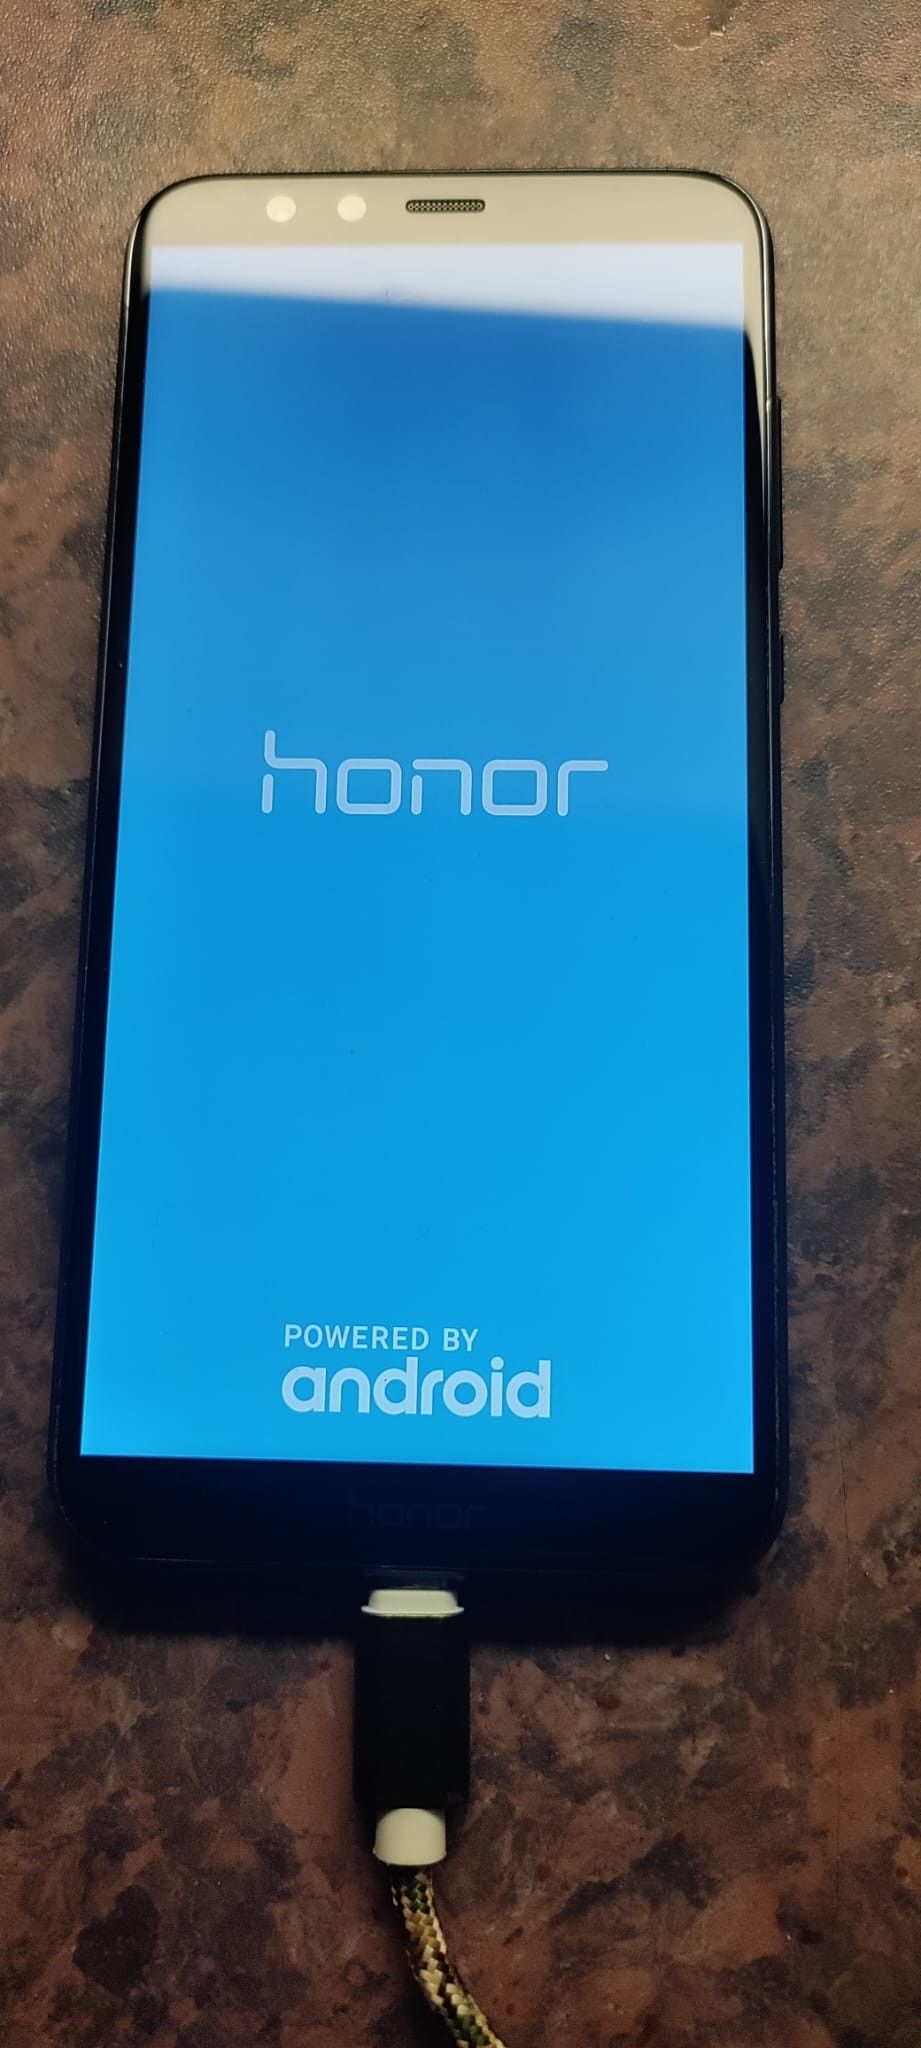 Honor 9 laite Android puhelin